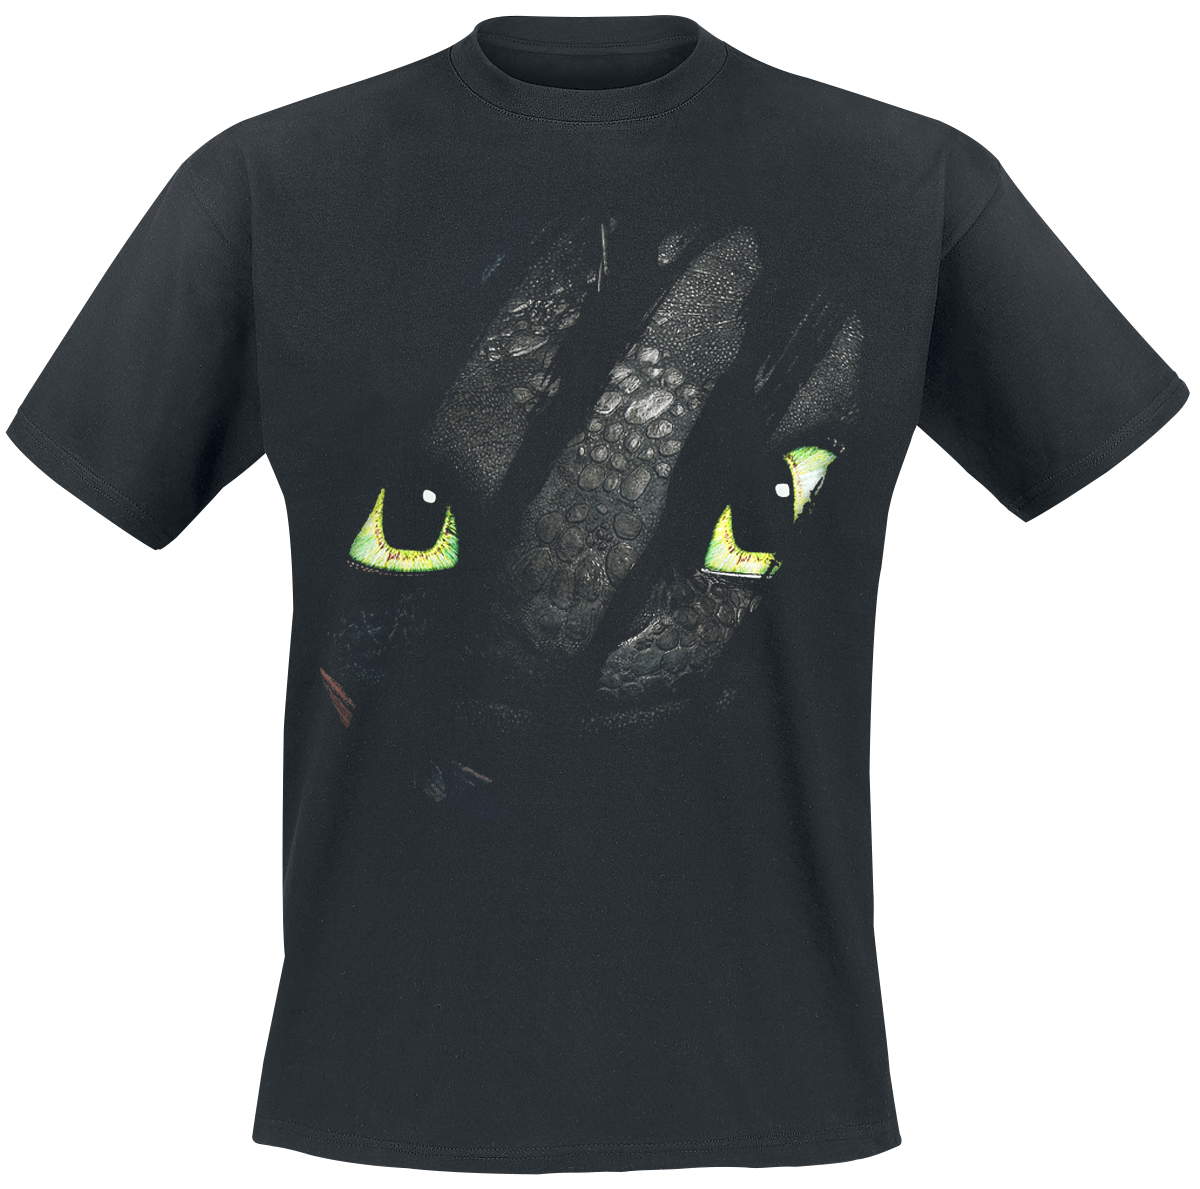 How to Train Your Dragon - Claw - T-Shirt - black image